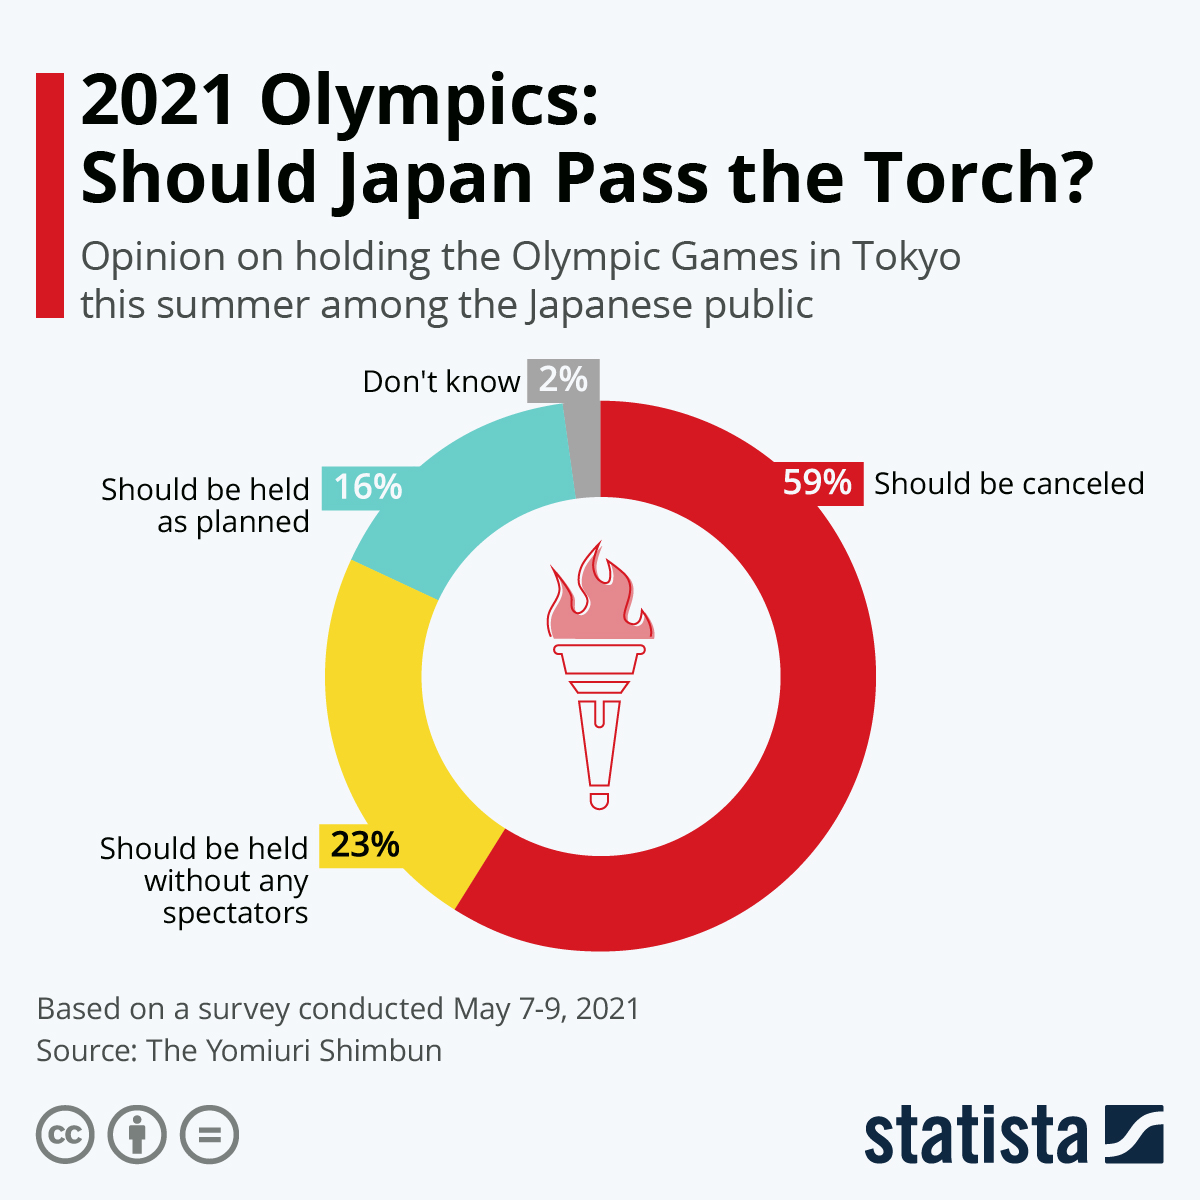 2021 Olympics: Should Japan Pass the Torch?